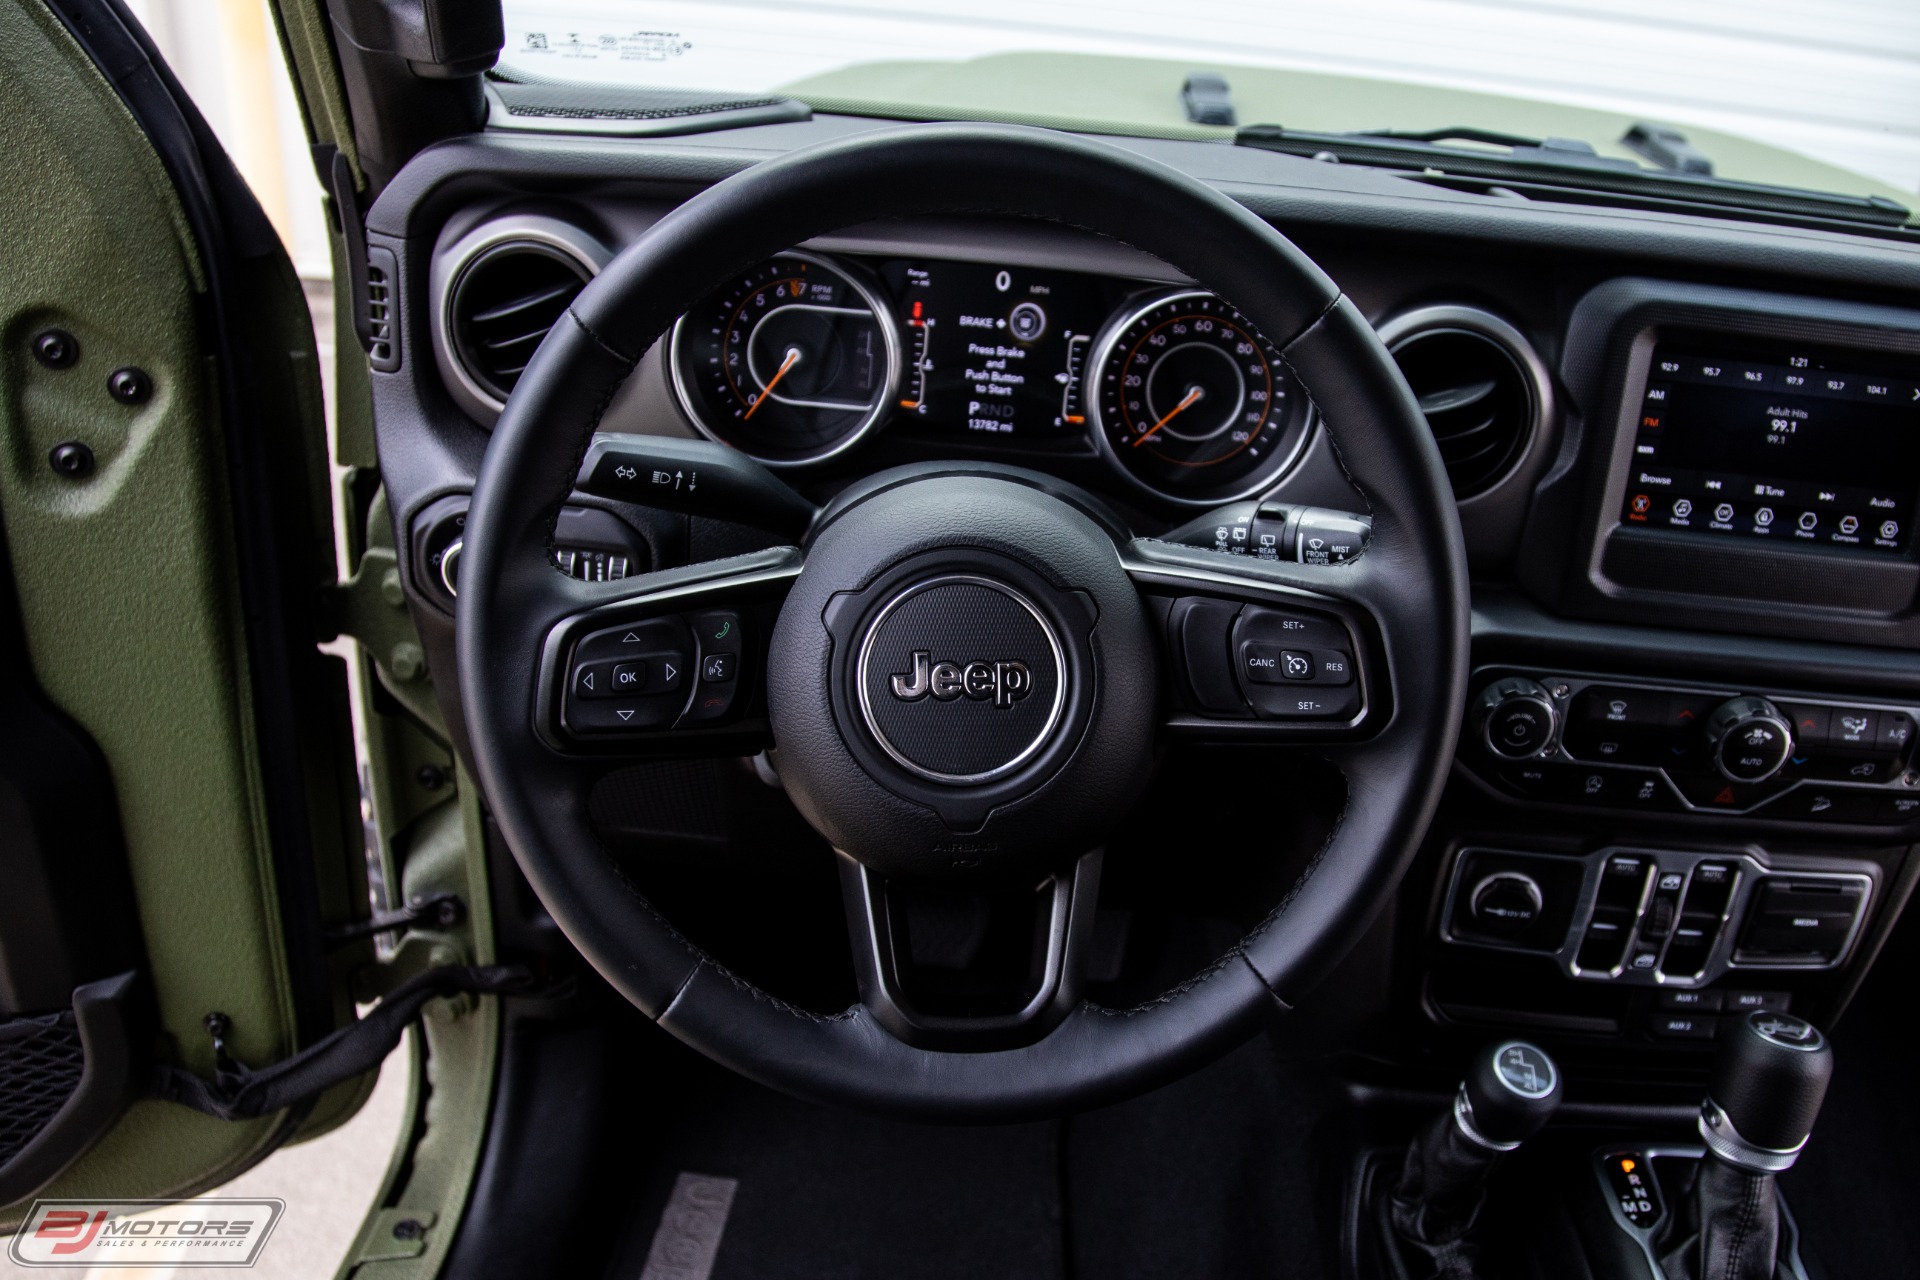 Used-2018-Jeep-Wrangler-Unlimited-Sport